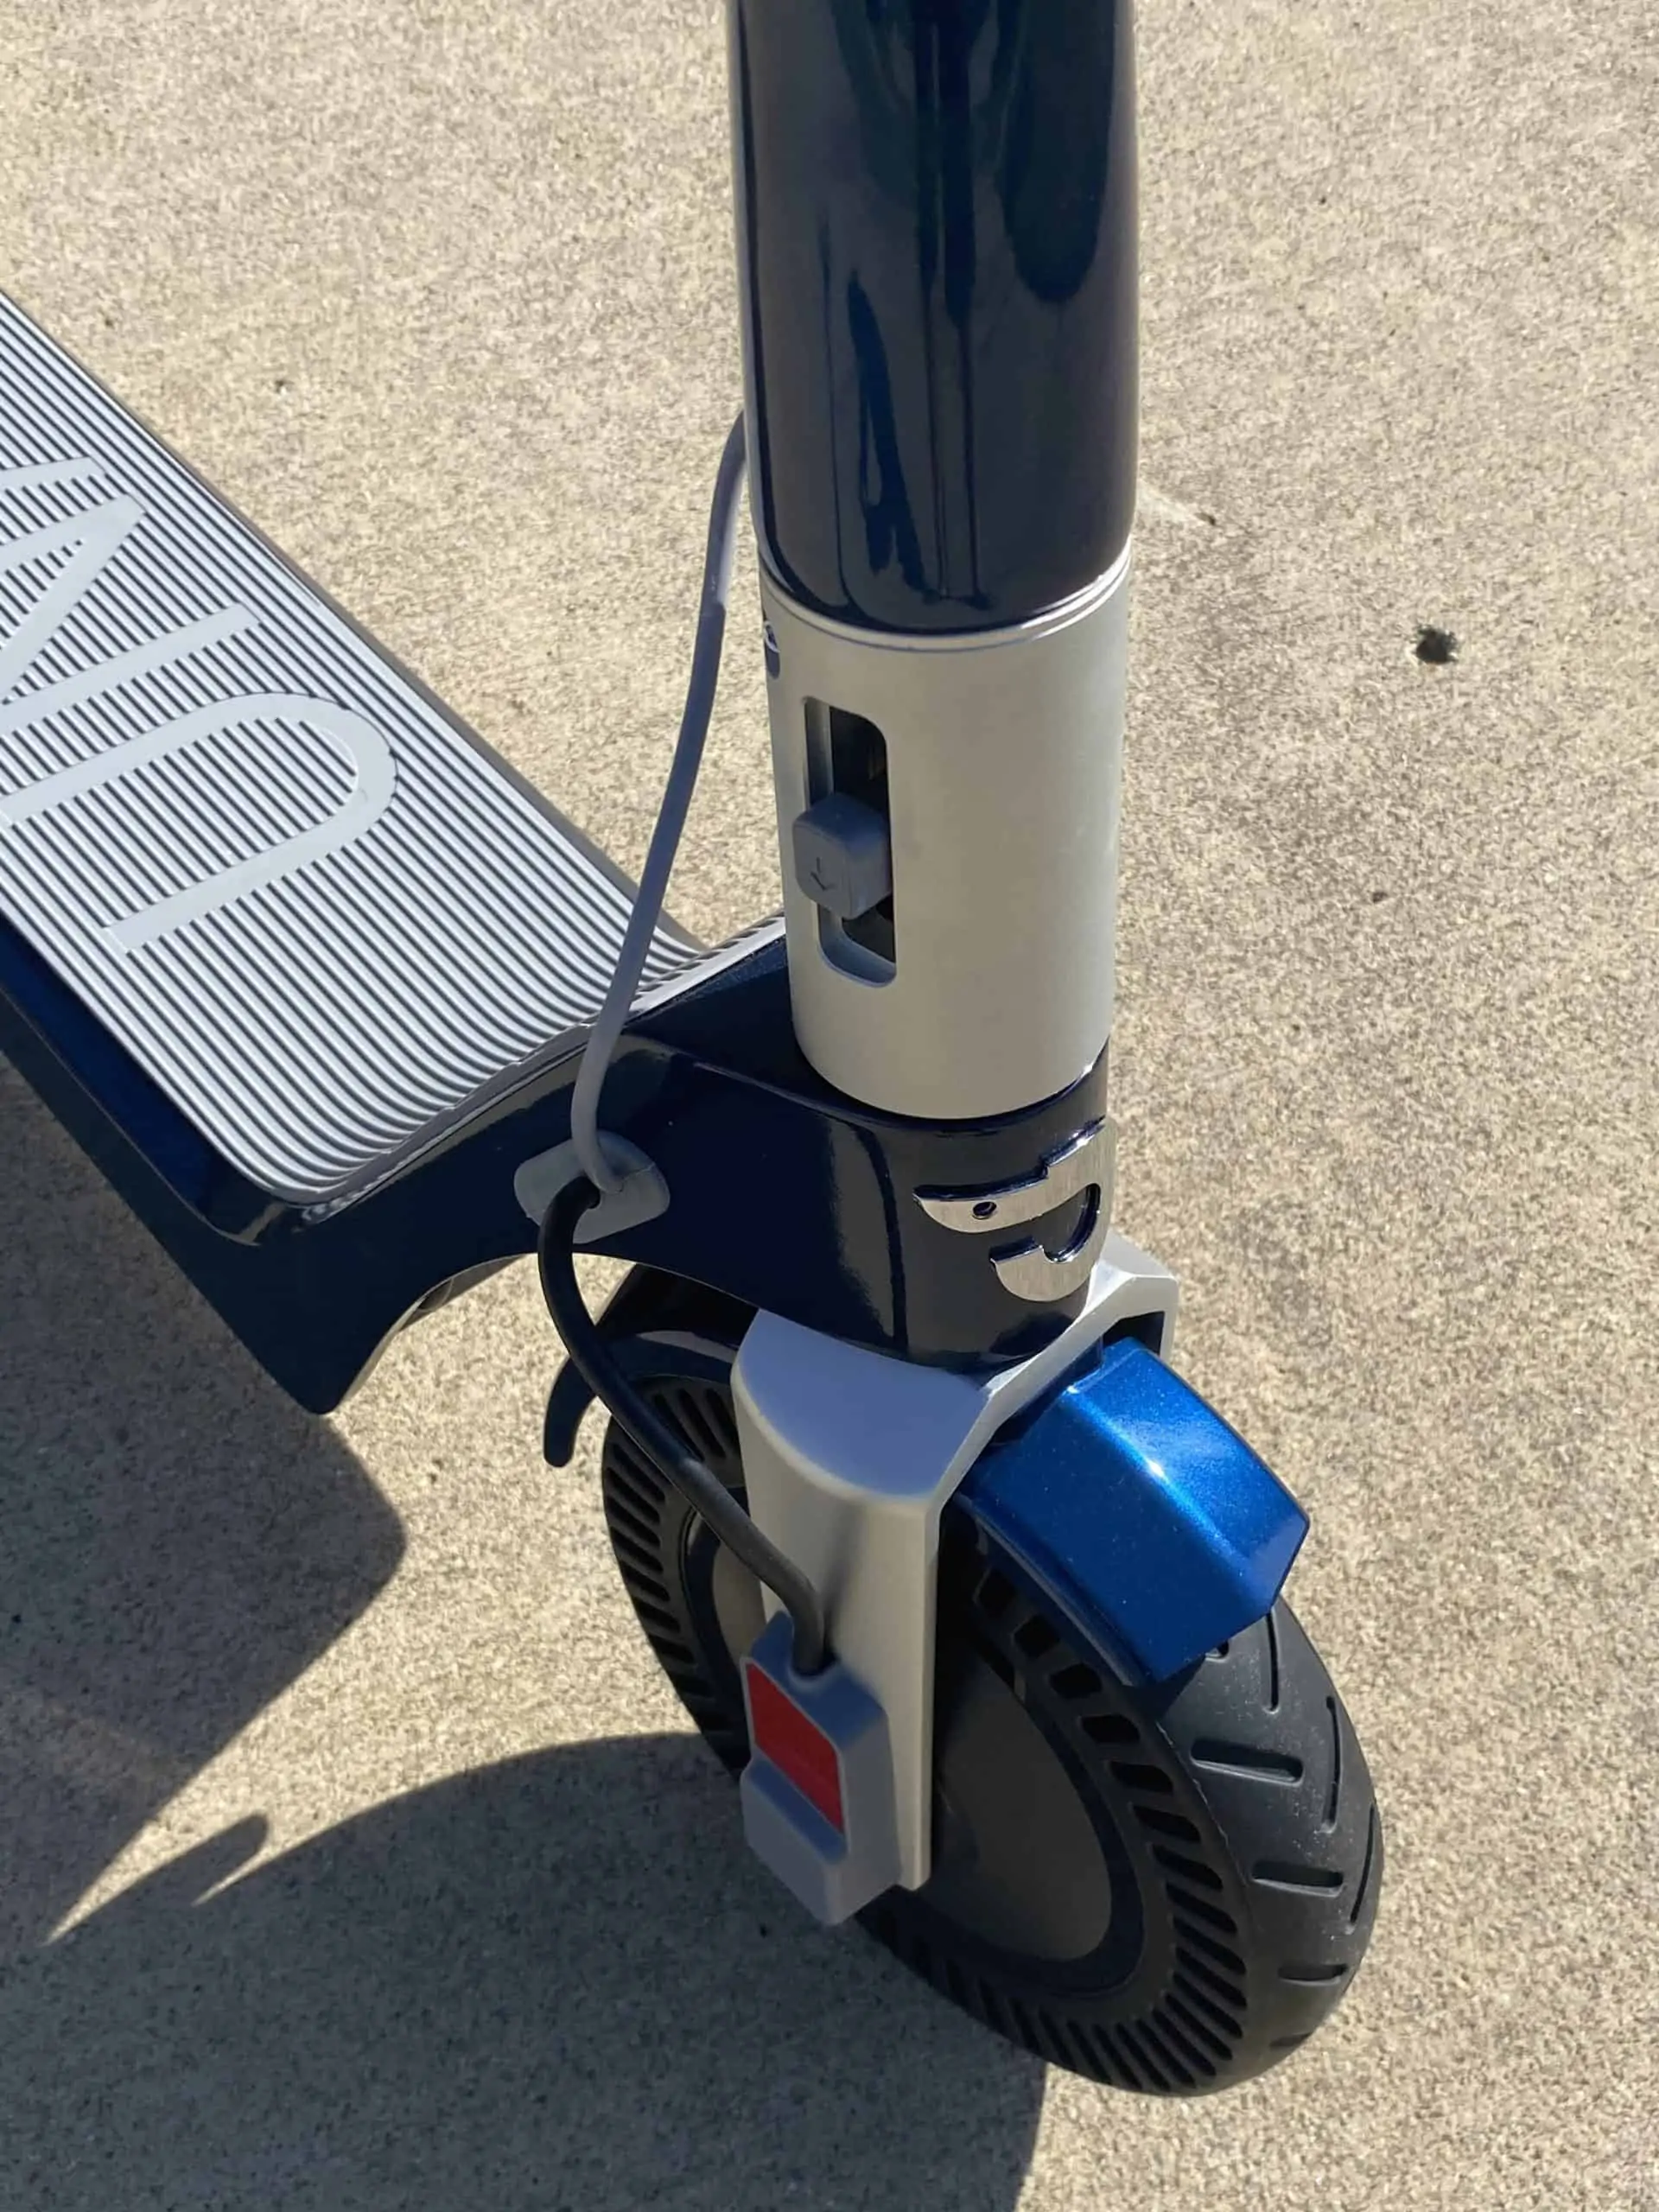 Unagi Electric Scooter Review – The Model One E500 7